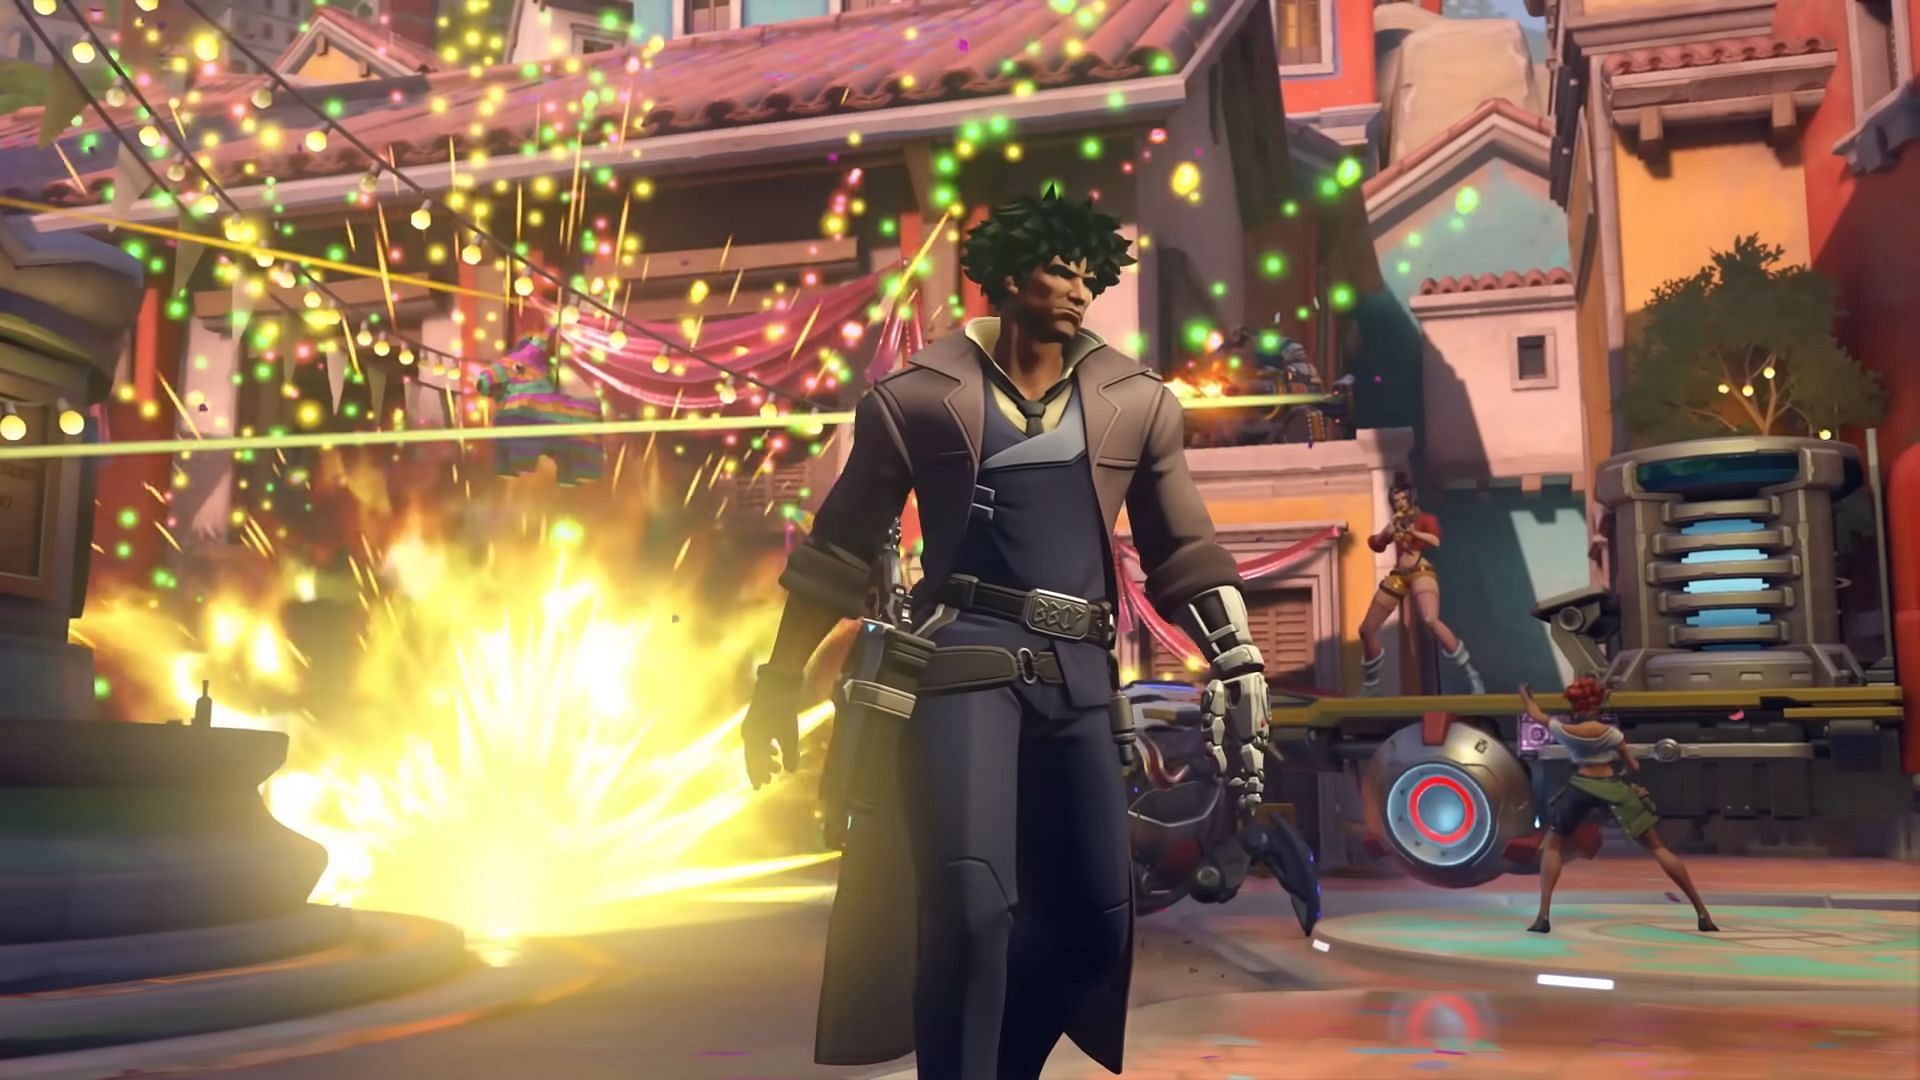 &quot;His hair looks wack&quot;: Fans frustrated with botched Overwatch 2 Cowboy Bebop crossover skin